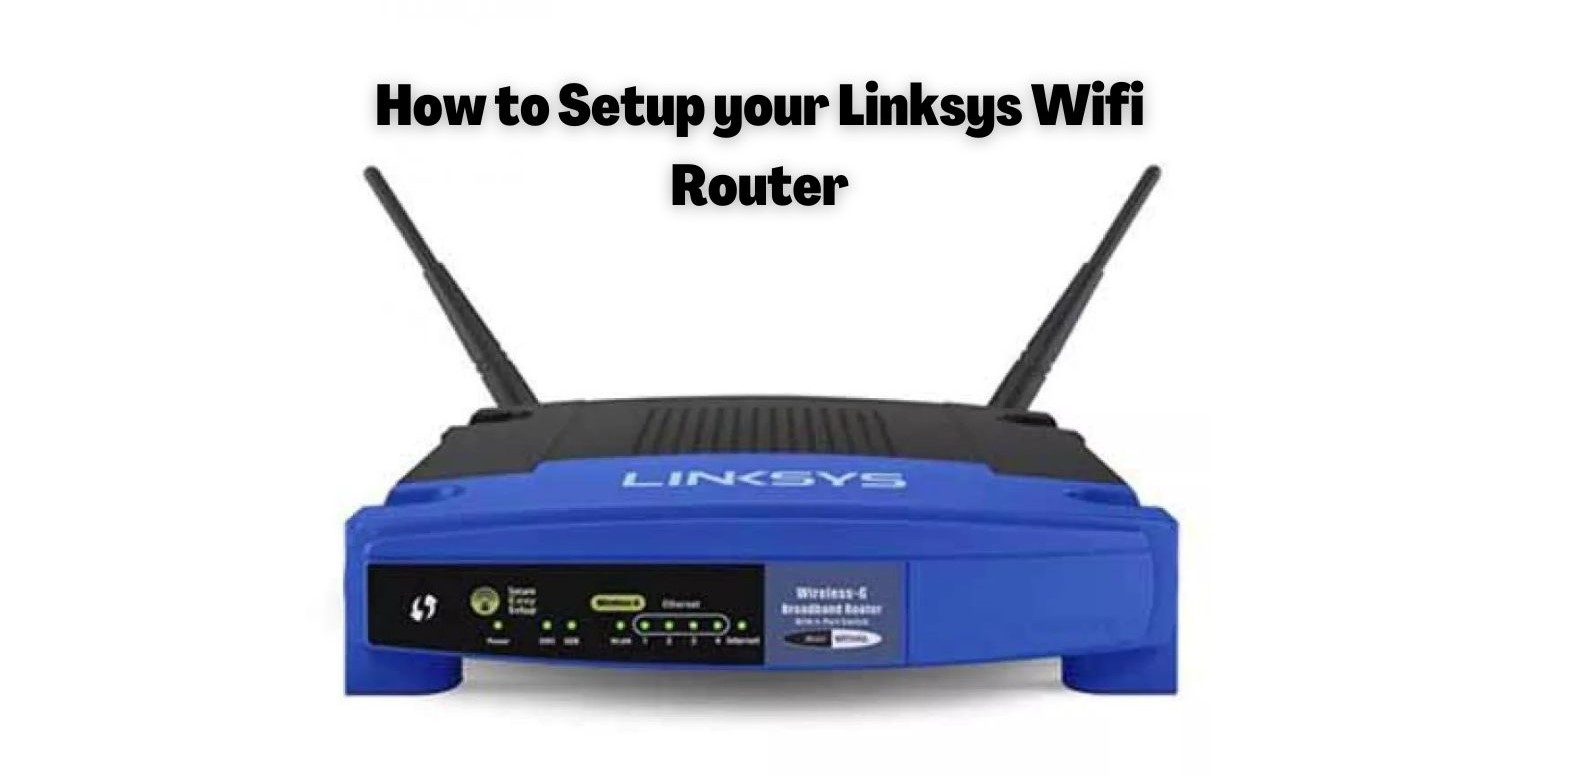 How to Setup your Linksys Wifi Router